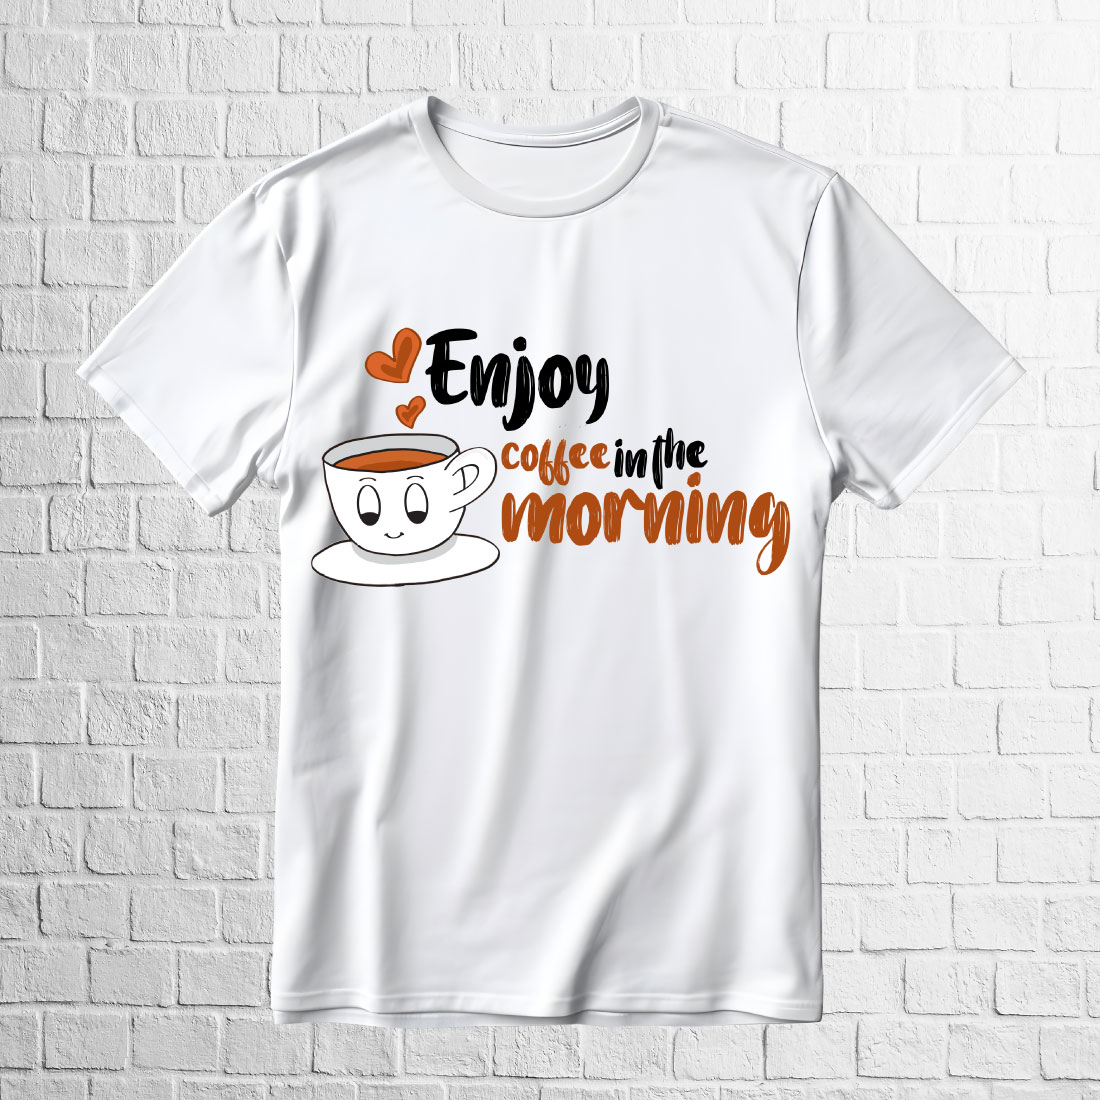 ENJOY COFFEE IN THE MORNING T-SHIRT DESIGN cover image.